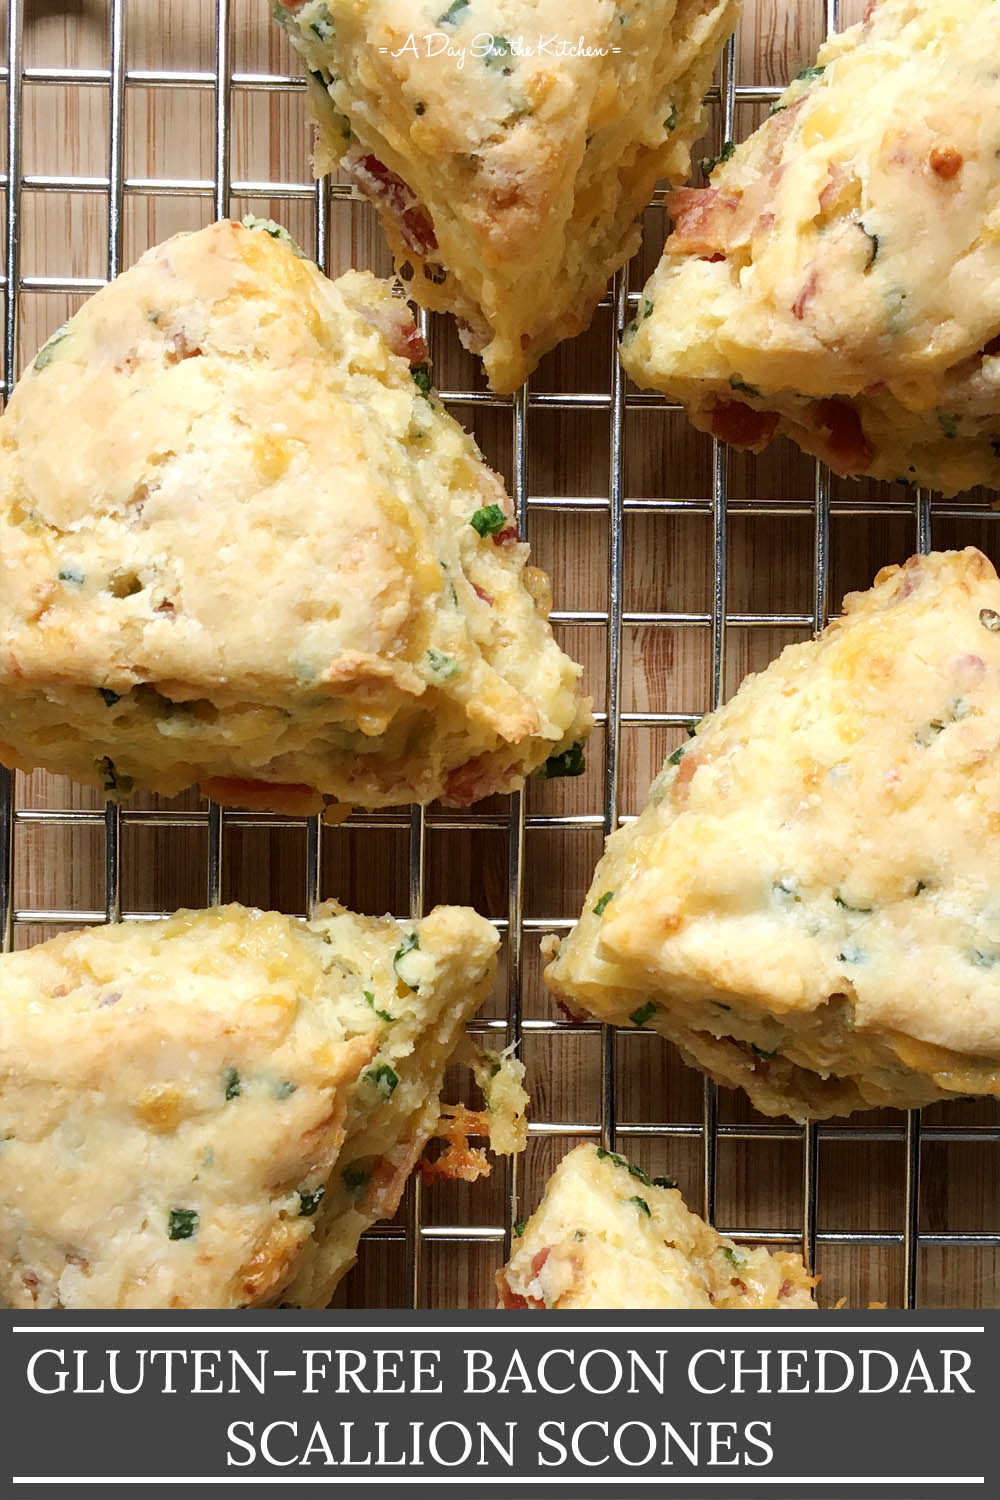 Several triangular shaped scones on a metal rack, the words gluten-free bacon cheddar scallion scones on the bottom.